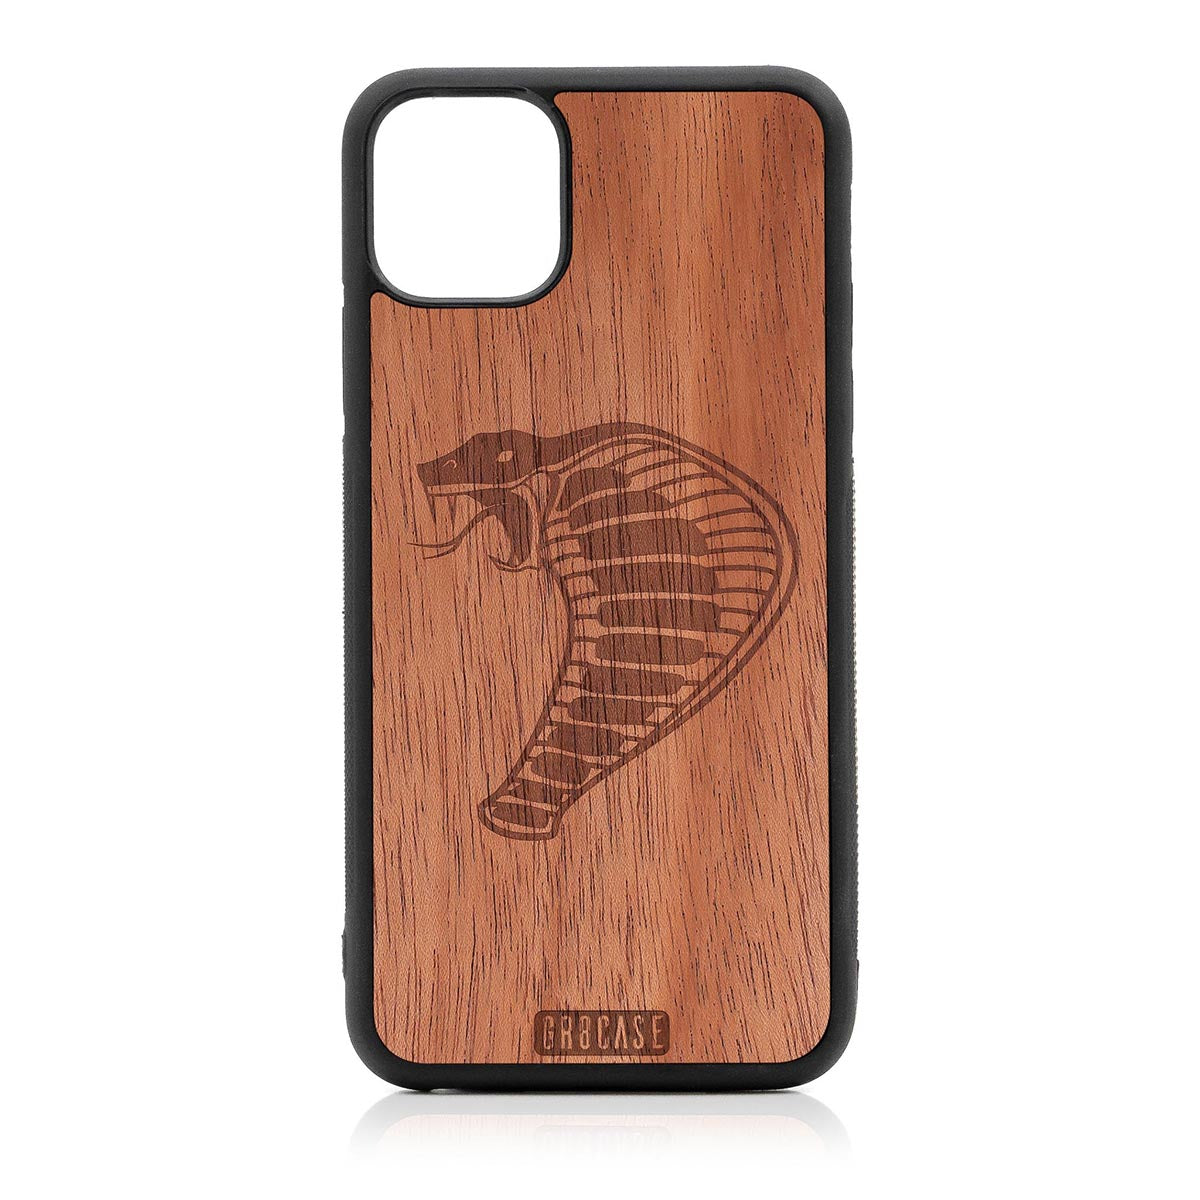 Cobra Design Wood Case For iPhone 11 Pro Max by GR8CASE